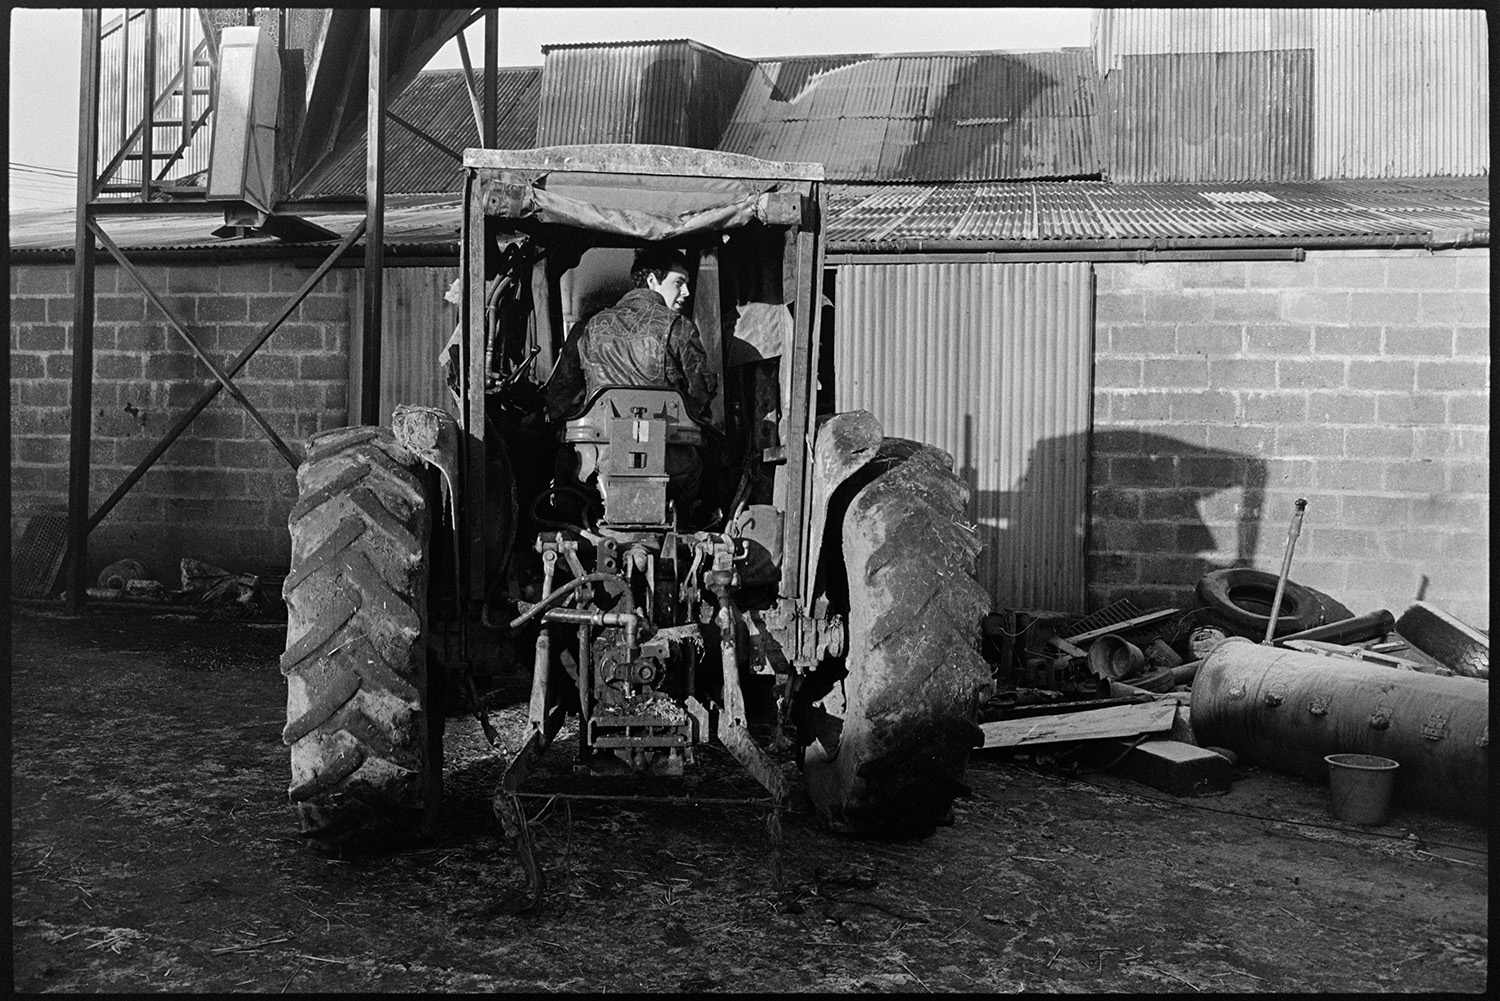 Farmyard scenes, bullocks, sheep, silage under polythene. 
[A man driving a tractor in the farmyard at Parsonage Farm, Chulmleigh. He is parked in front of a brick and corrugated iron barn with various items piled outside.]